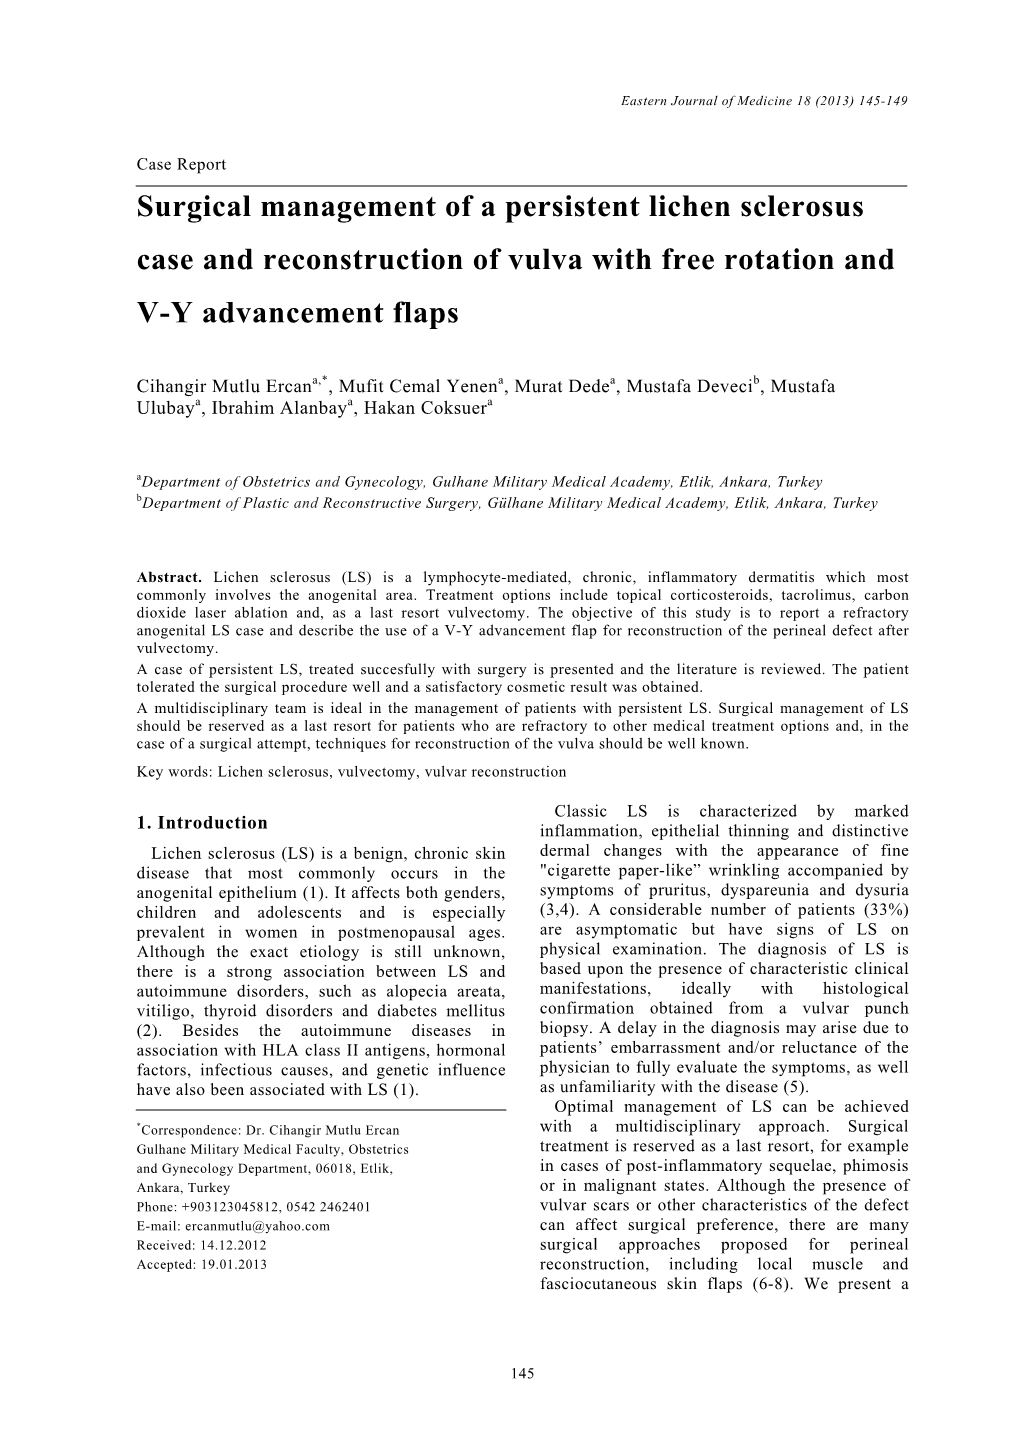 Surgical Management of a Persistent Lichen Sclerosus Case and Reconstruction of Vulva with Free Rotation and V-Y Advancement Flaps